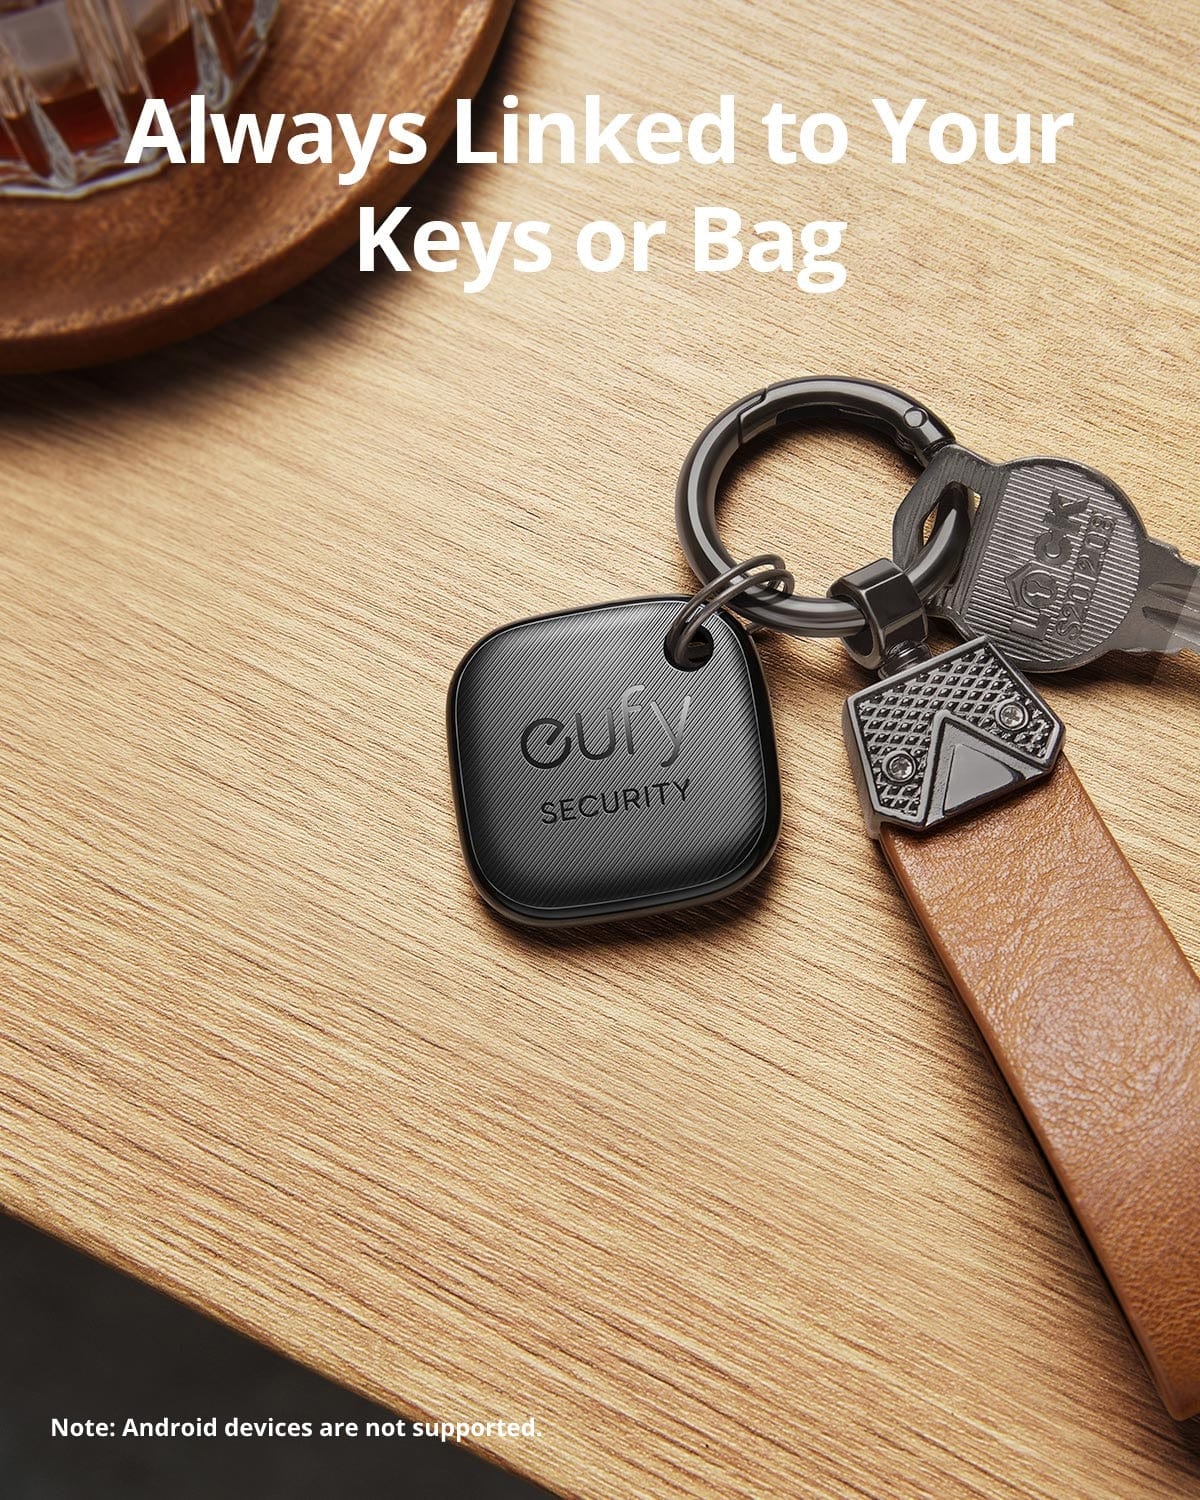 eufy eufy Security, Tracking Devices, T87B0 version